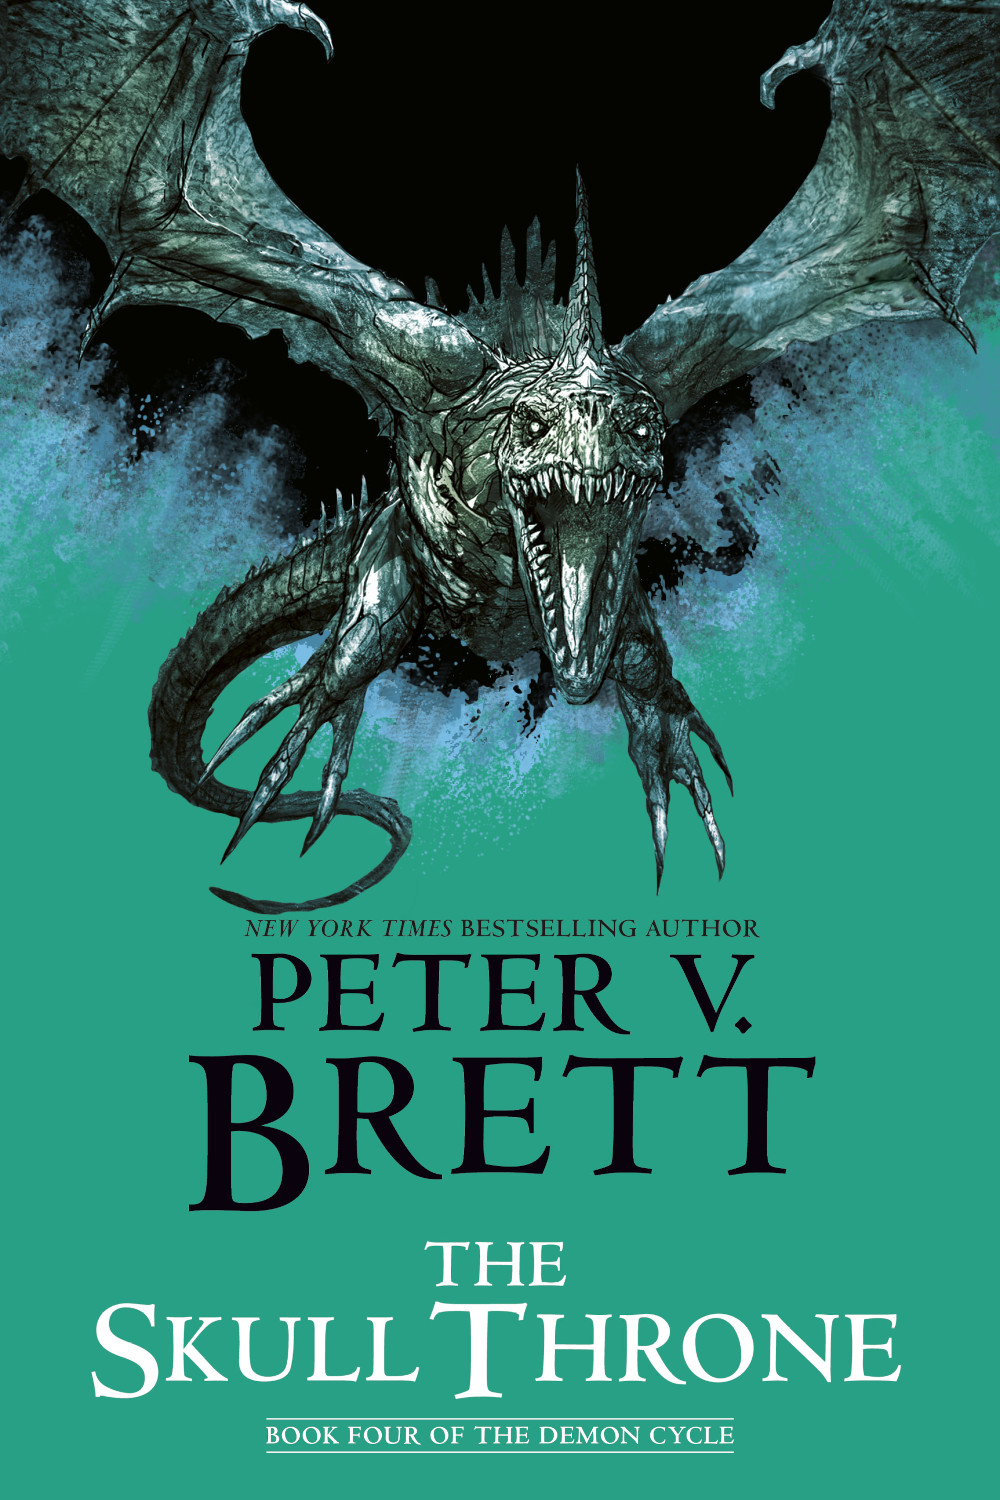 The Skull Throne by Peter V. Brett, Book Four of The Demon Cycle (US cover)